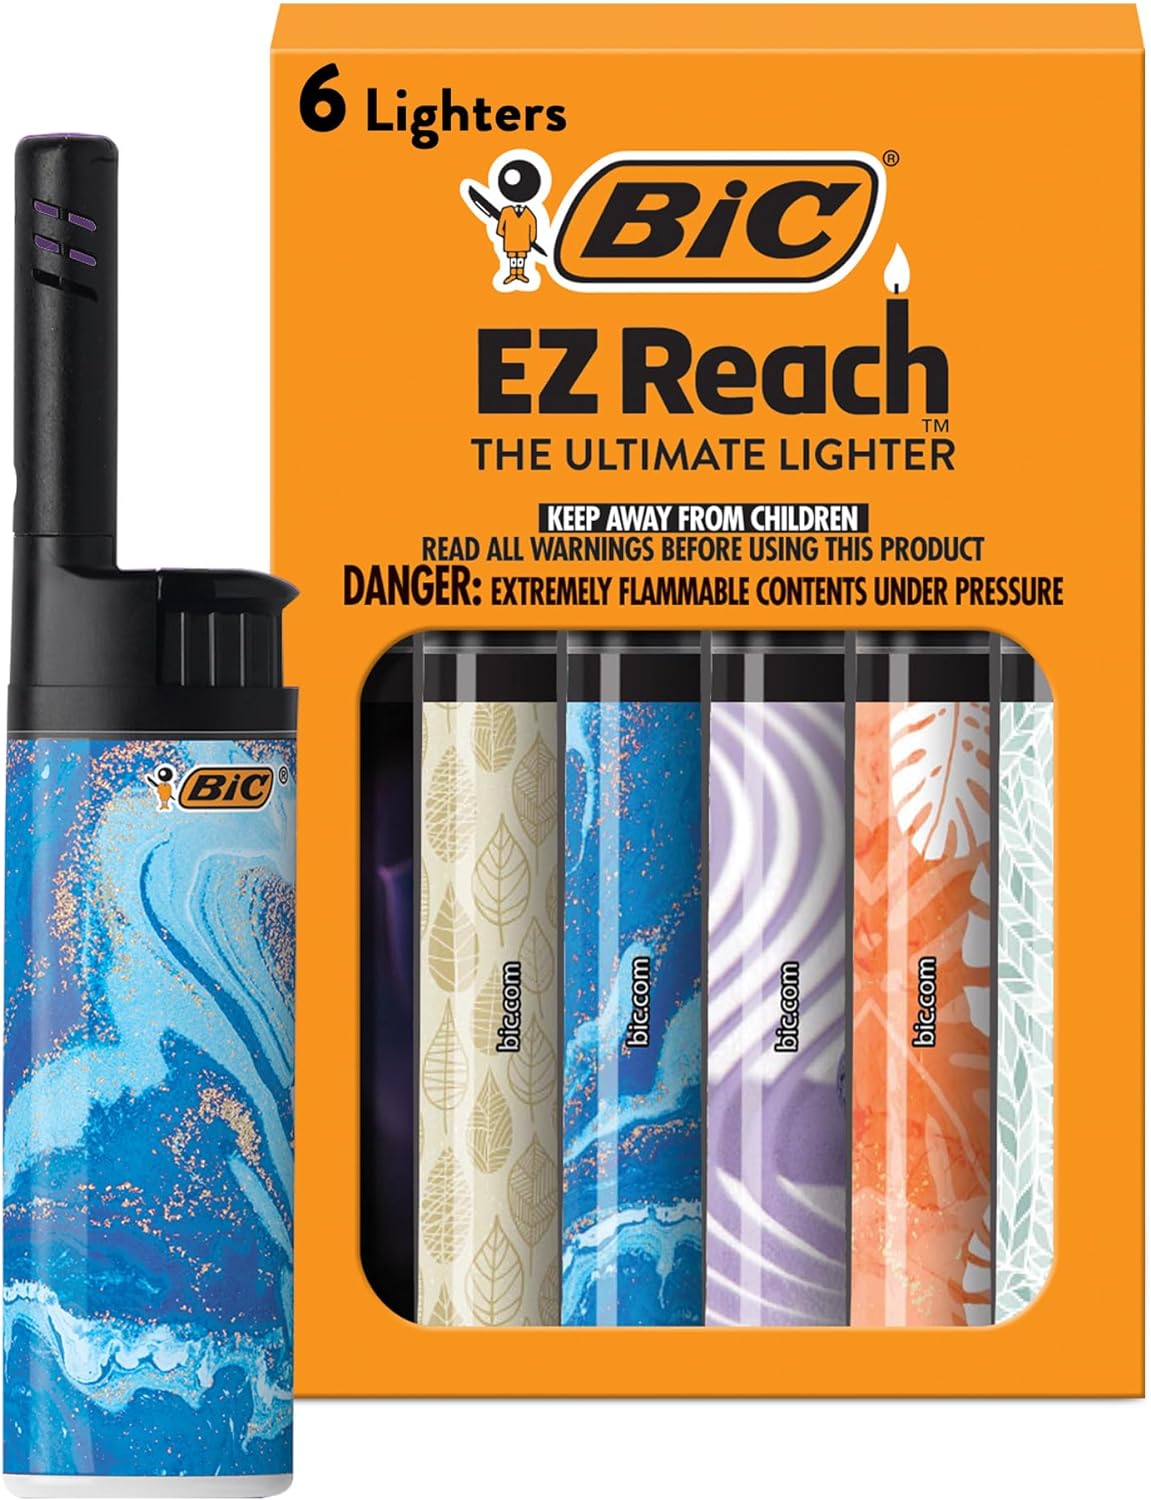 BIC EZ Reach Candle Lighter, The Ultimate Lighter with Wand for Candles, Assorted Designs, 6 Count Pack of Lighters, Perfect Stocking Stuffers